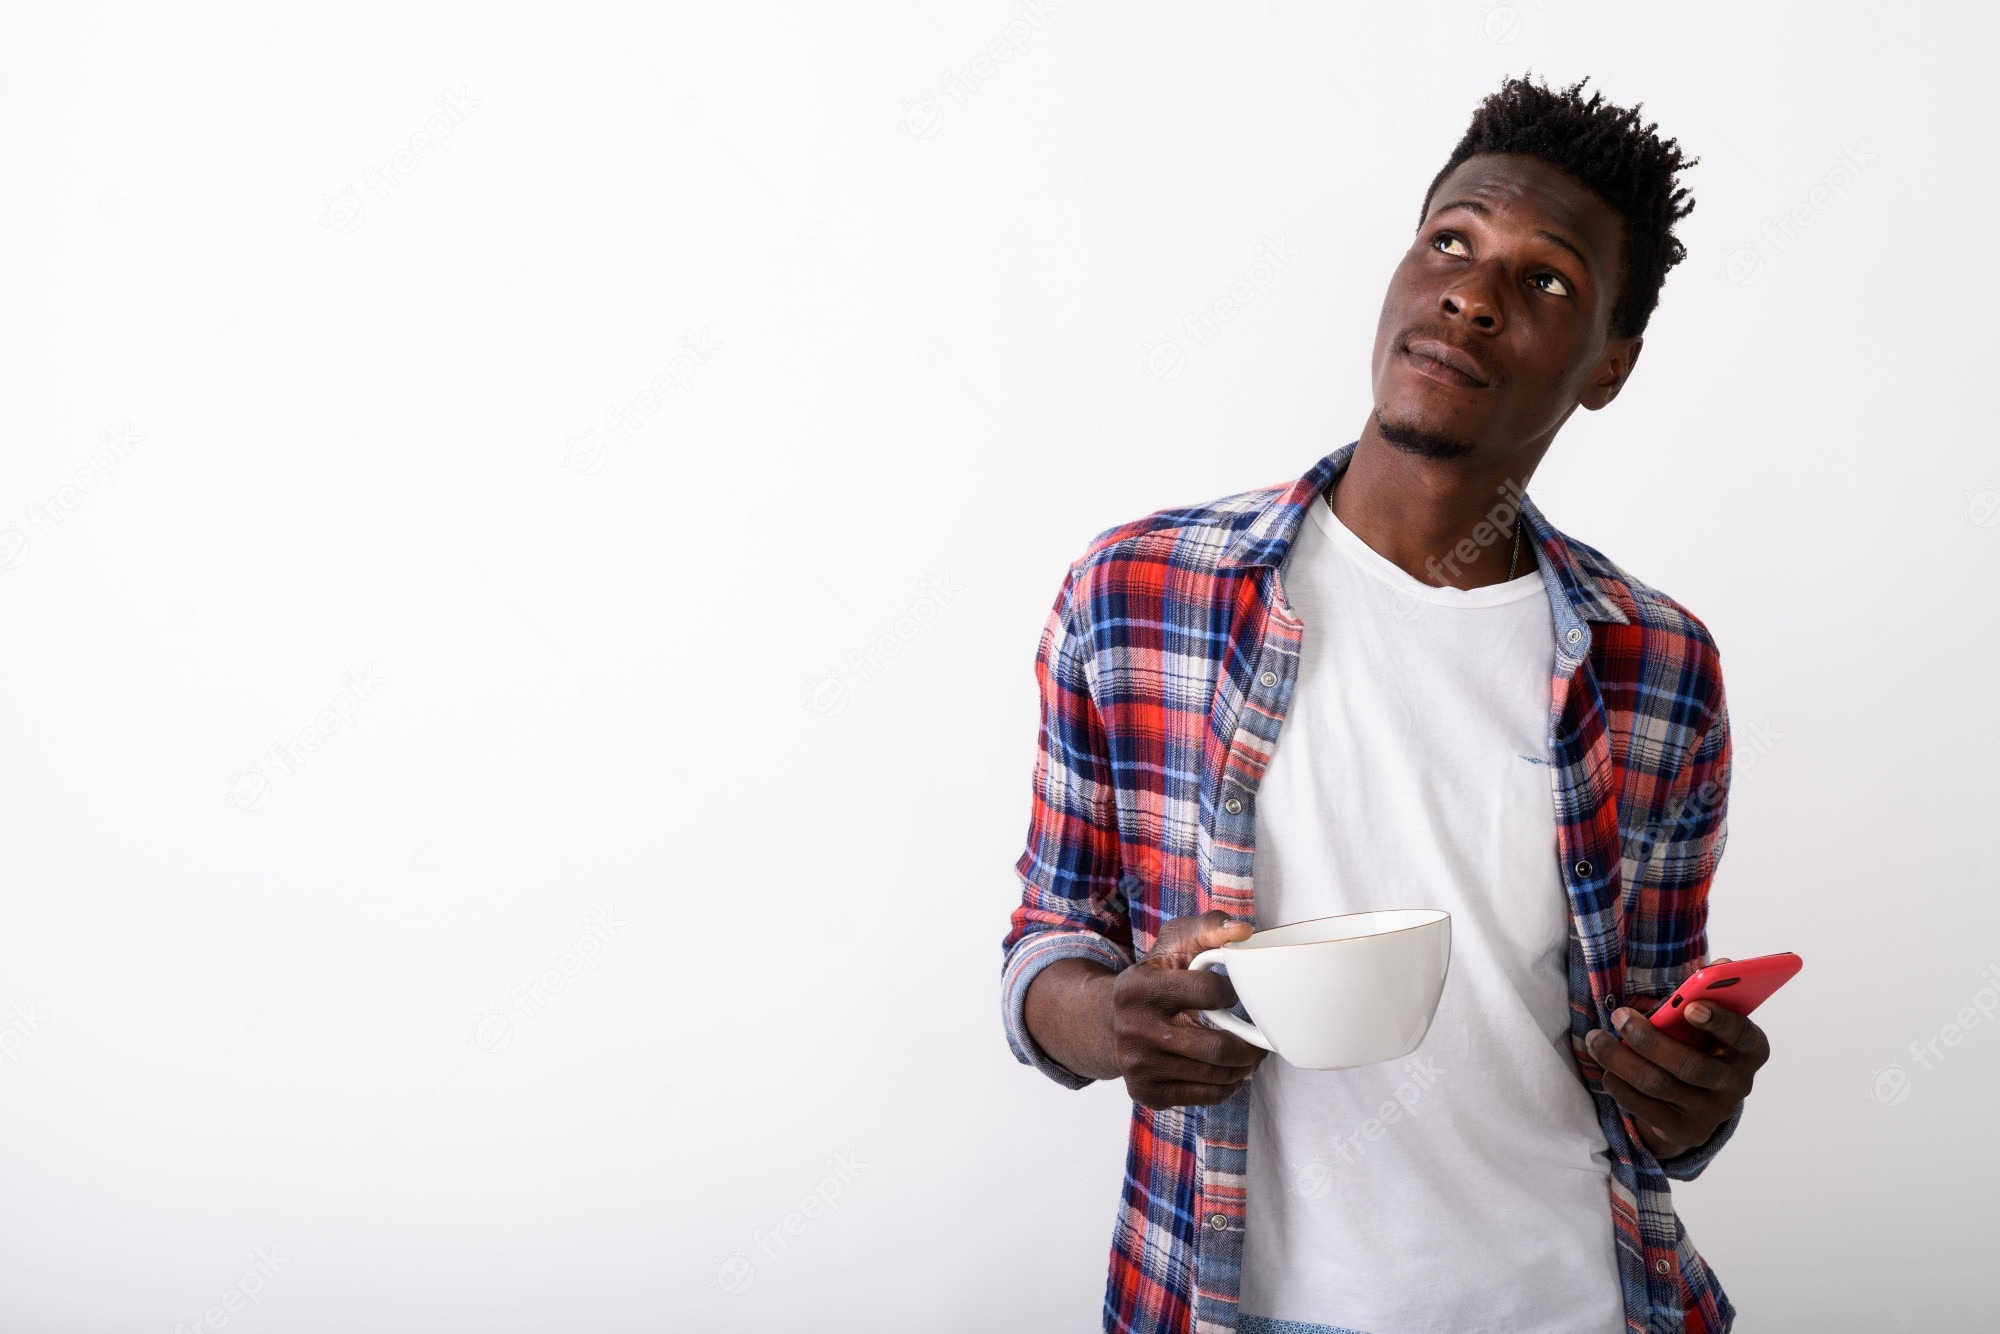 Man Thinking With Cup and Phone In Hand